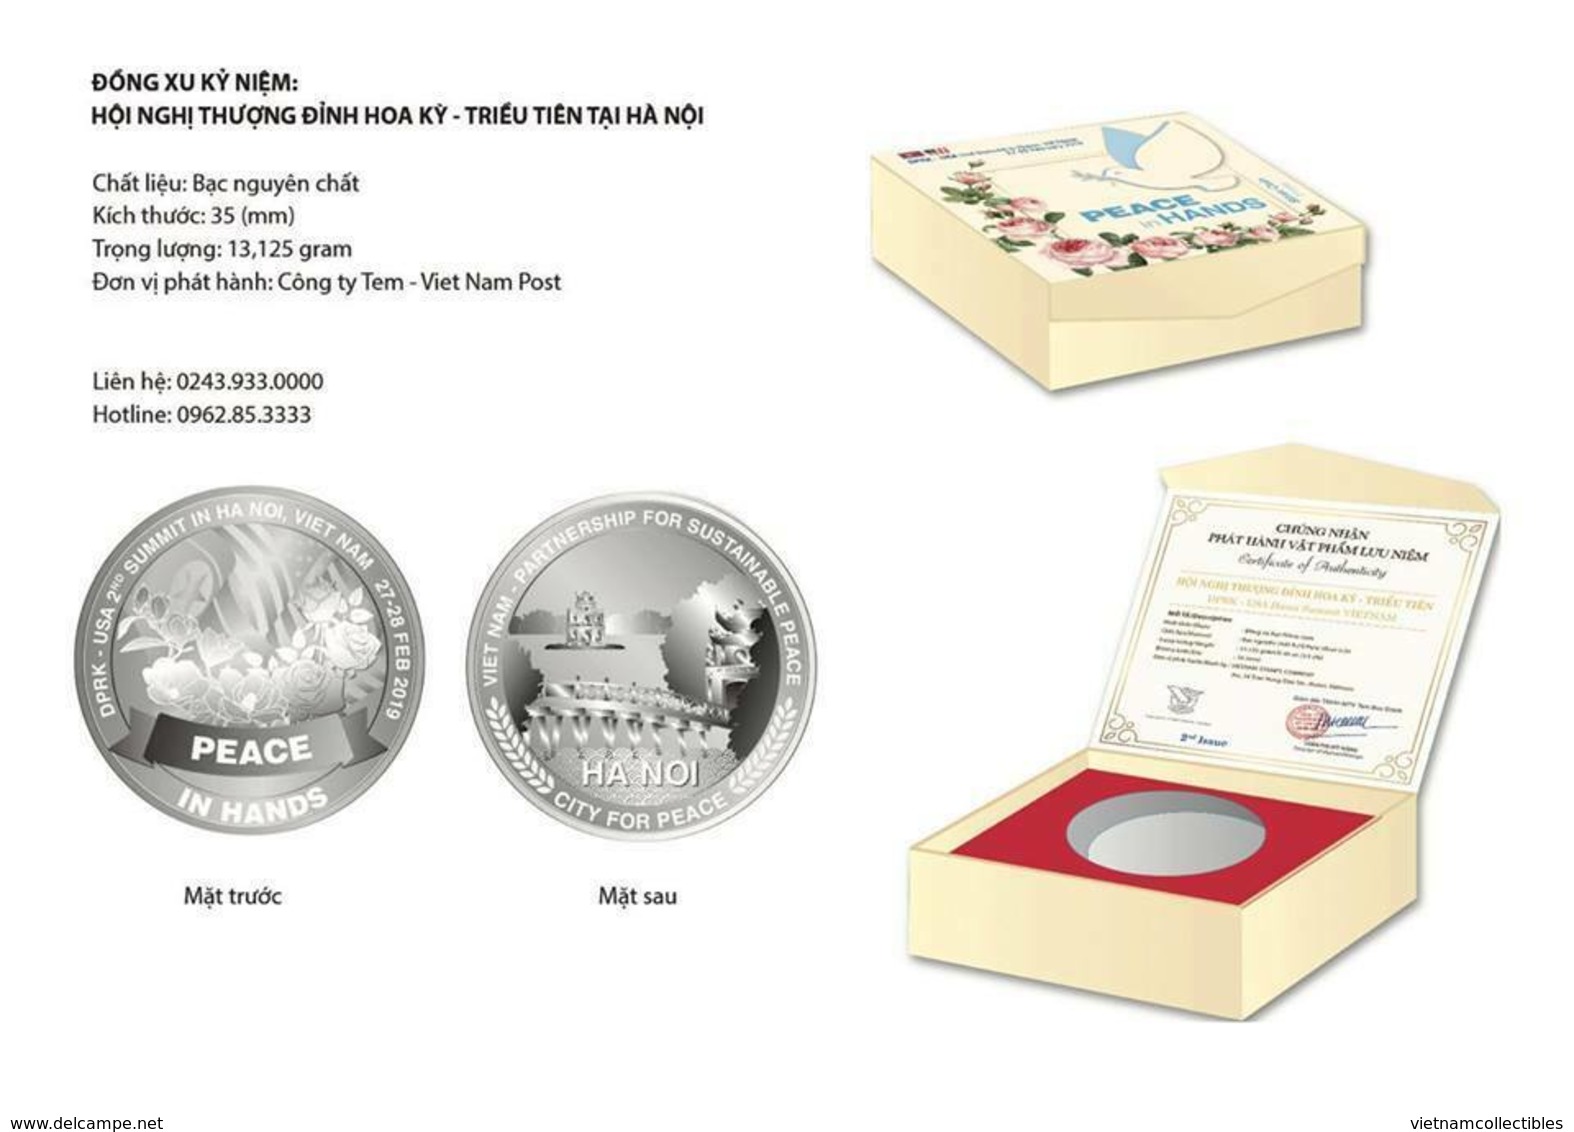 2 Silver Coins for DPRK USA Summit in VIET NAM 2nd